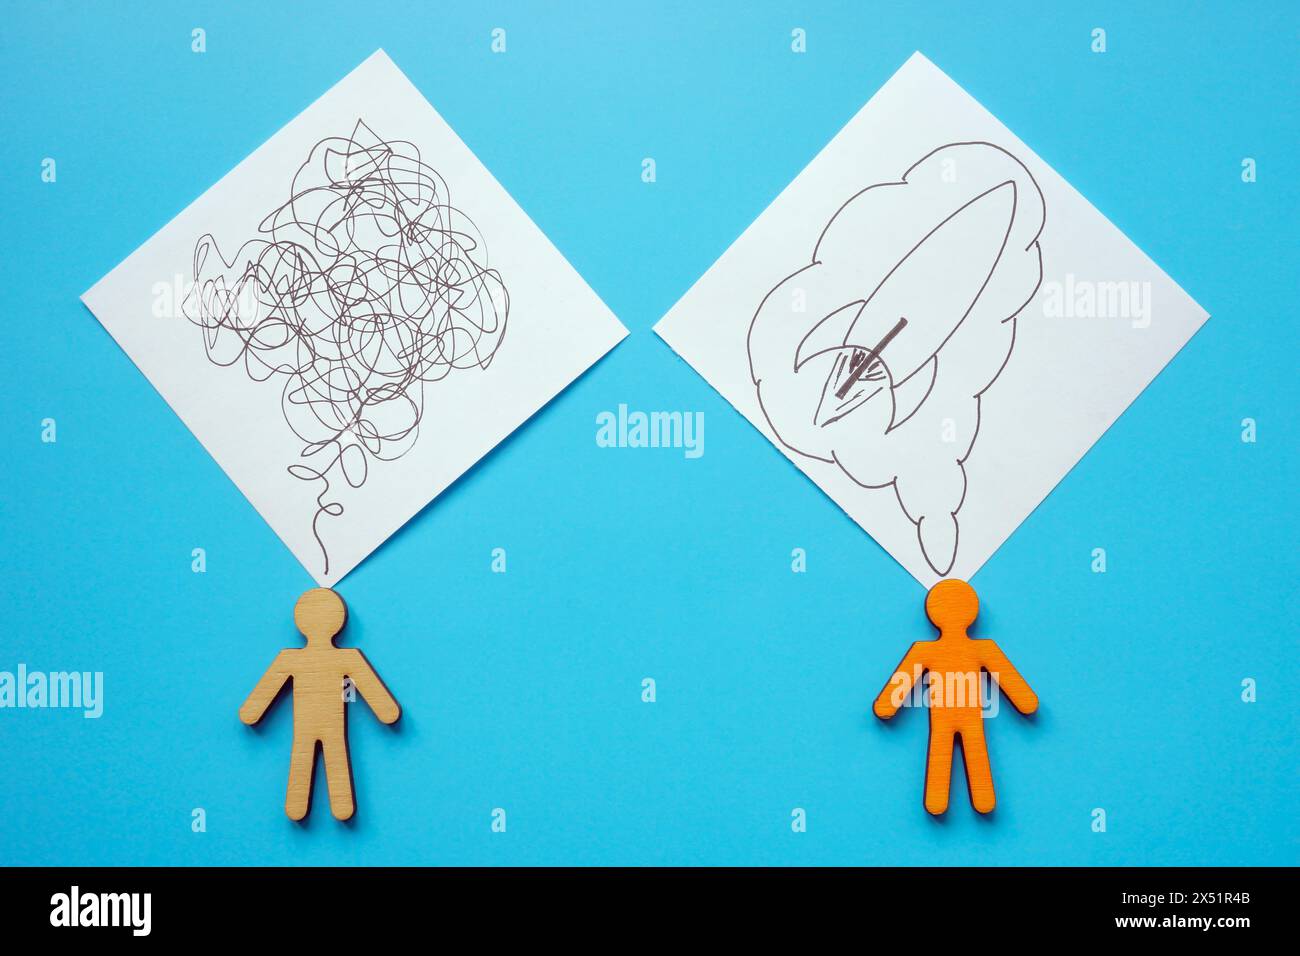 Two figures and stickers symbolizing the search for a solution and a new idea. Stock Photo